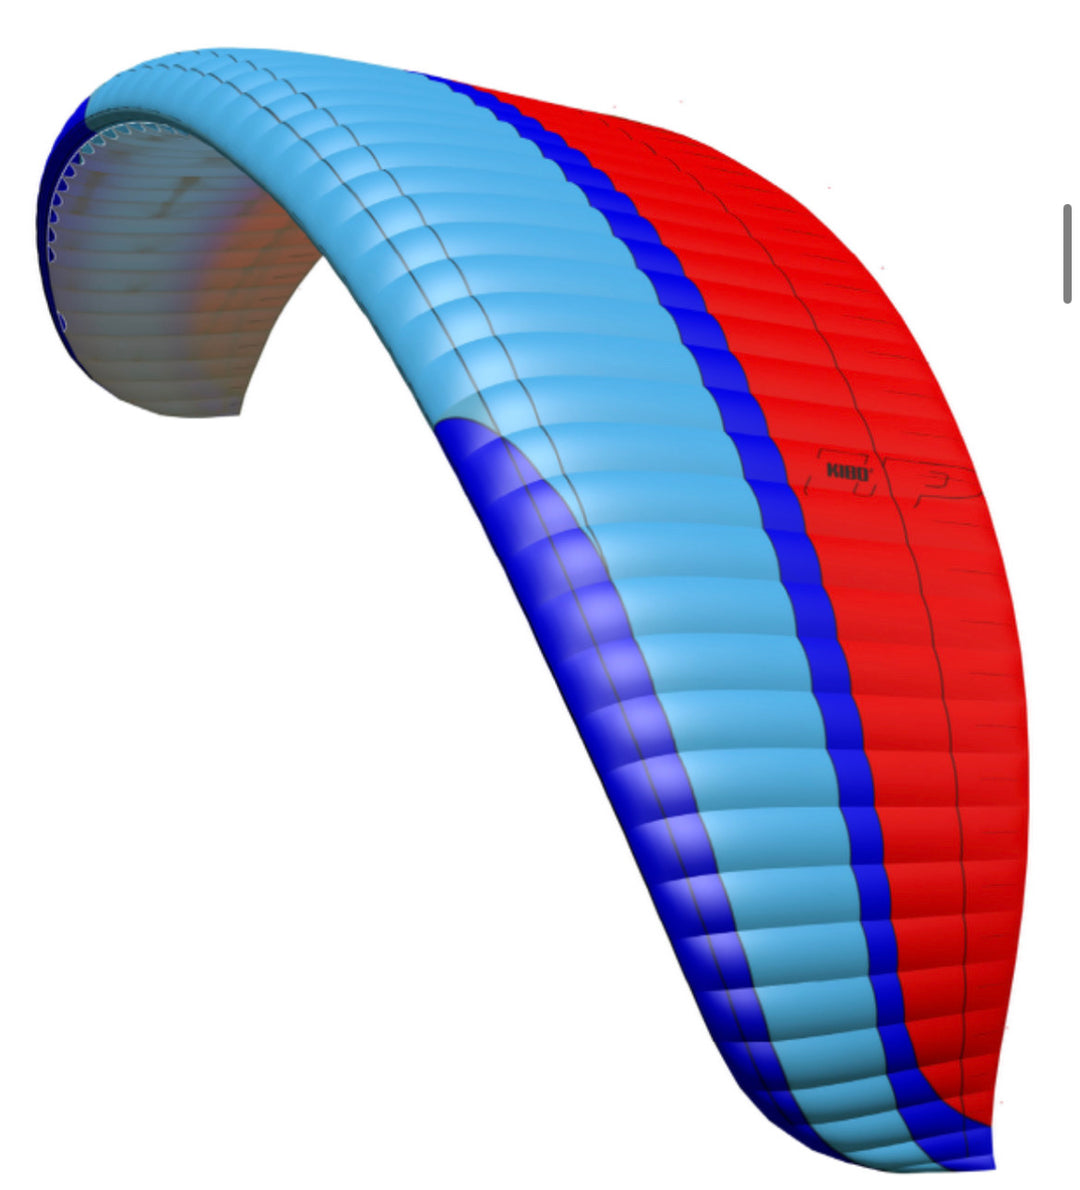 UP Kibo 2 paragliding wing red blue